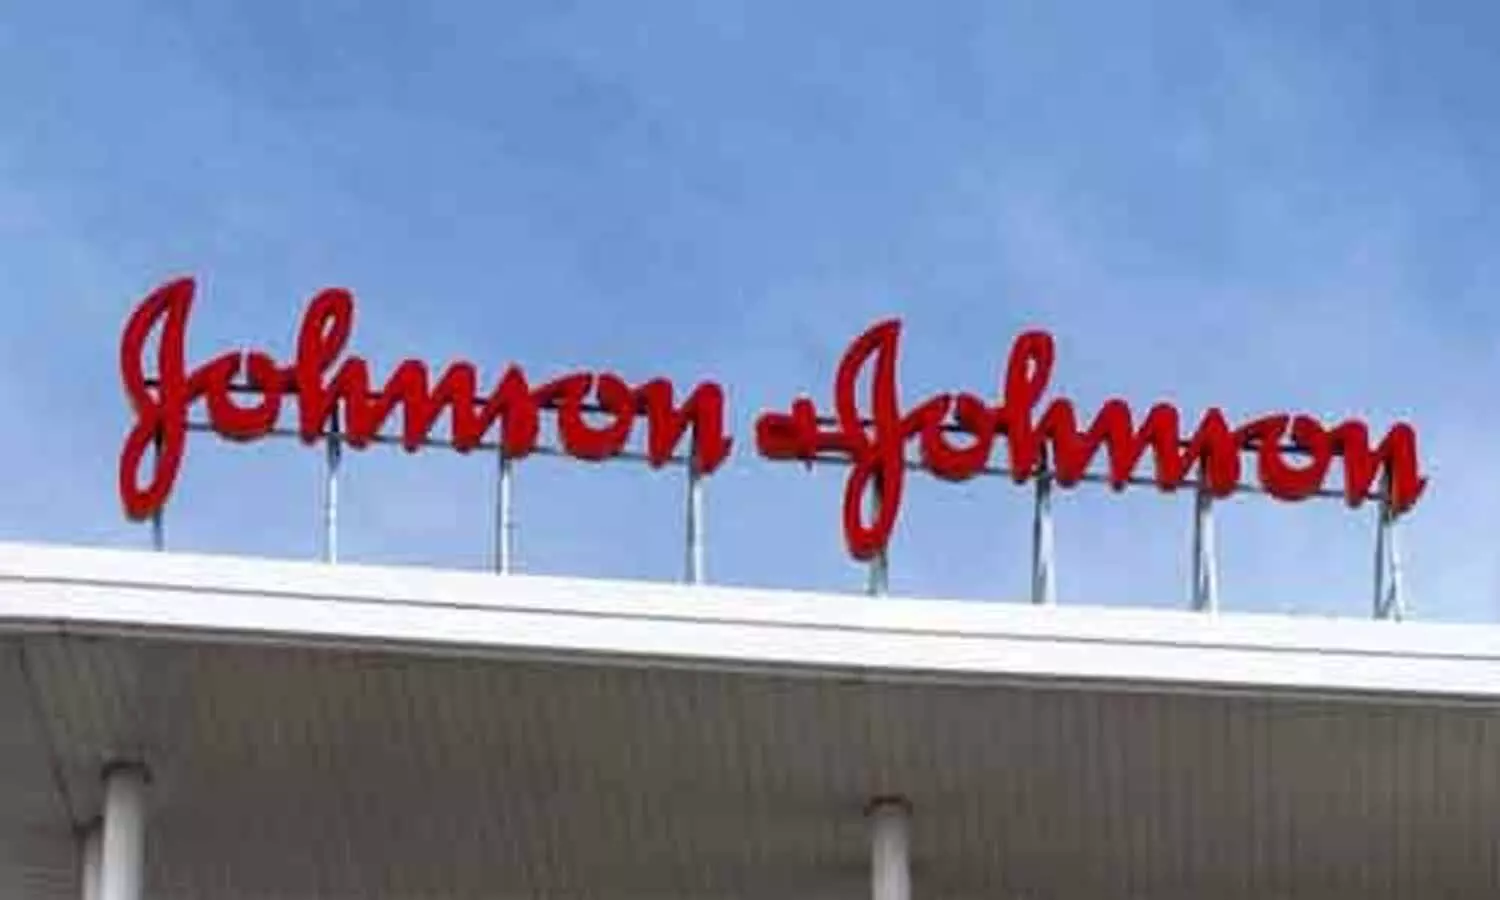 Johnson and Johnson to submit single-dose COVID-19 vaccine trial data: Bloomberg